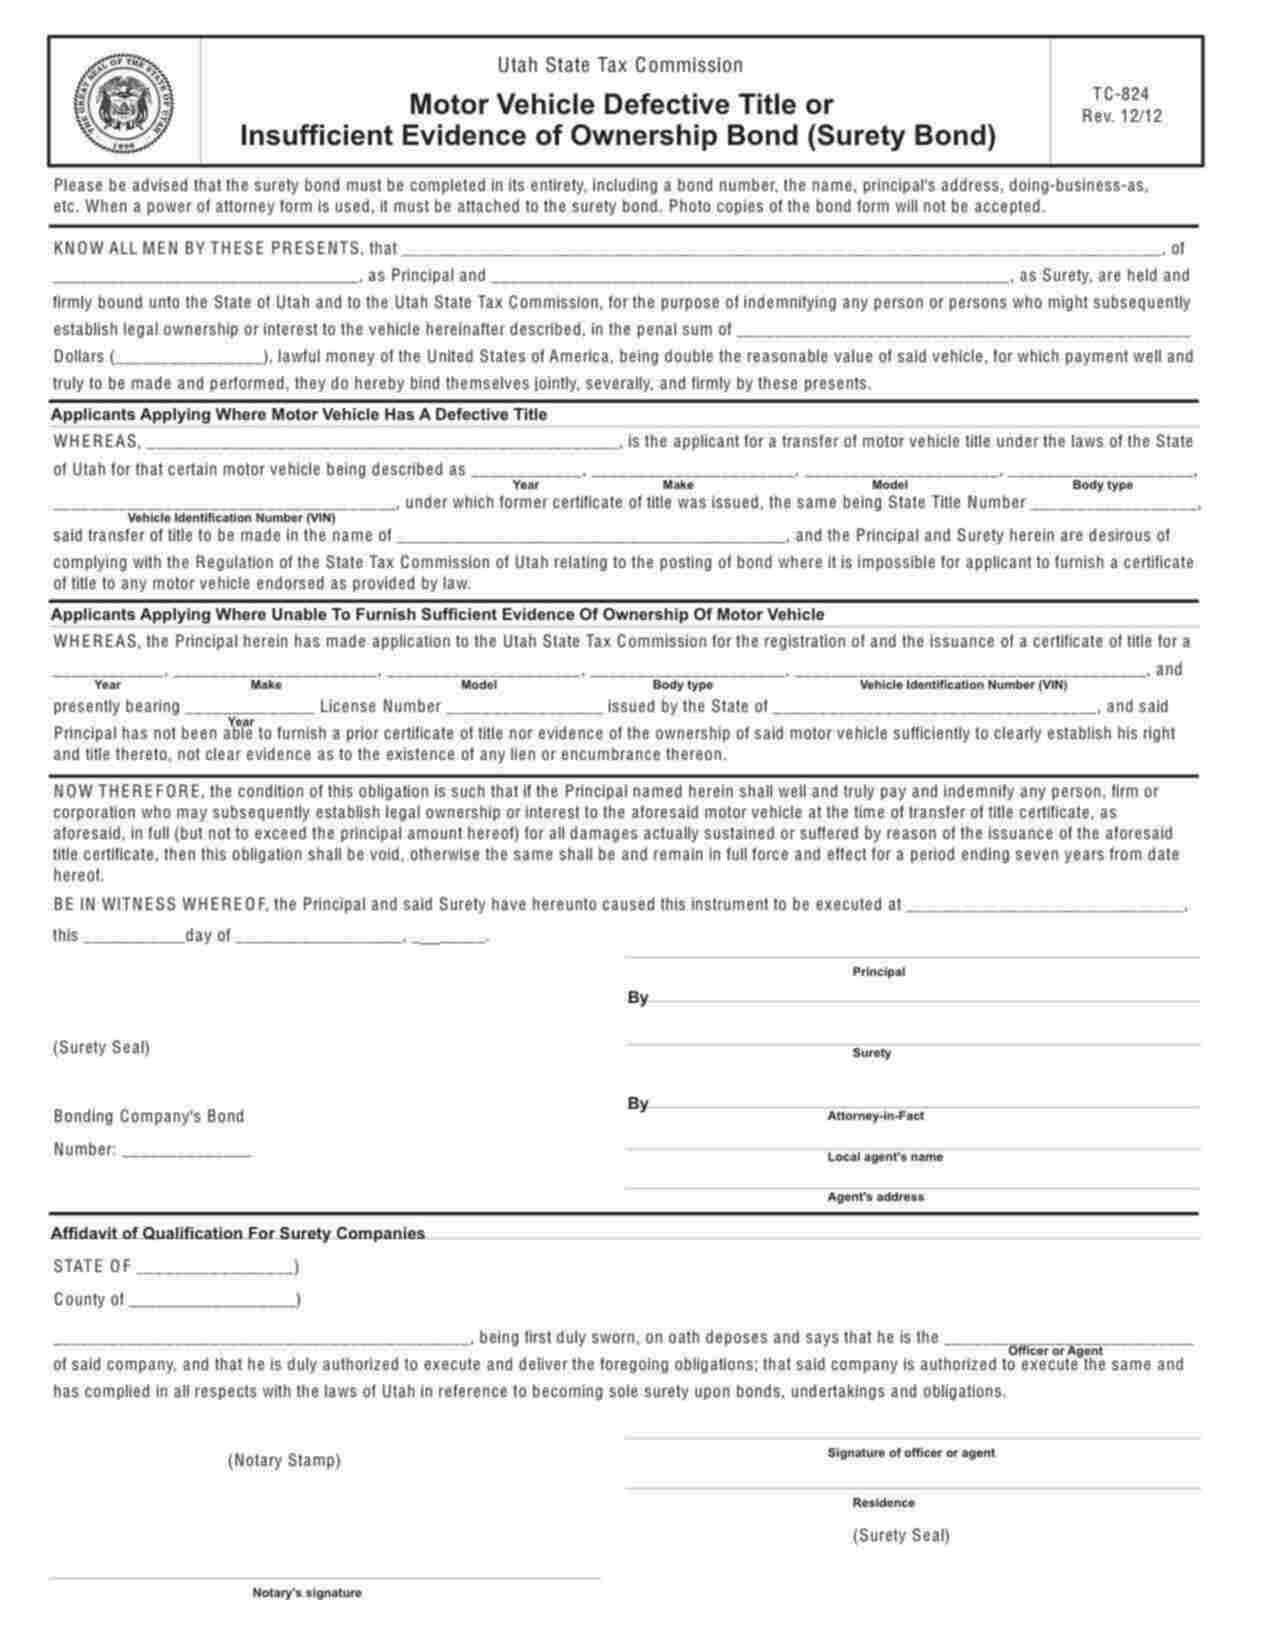 Utah Insufficient Evidence of Ownership Bond Form